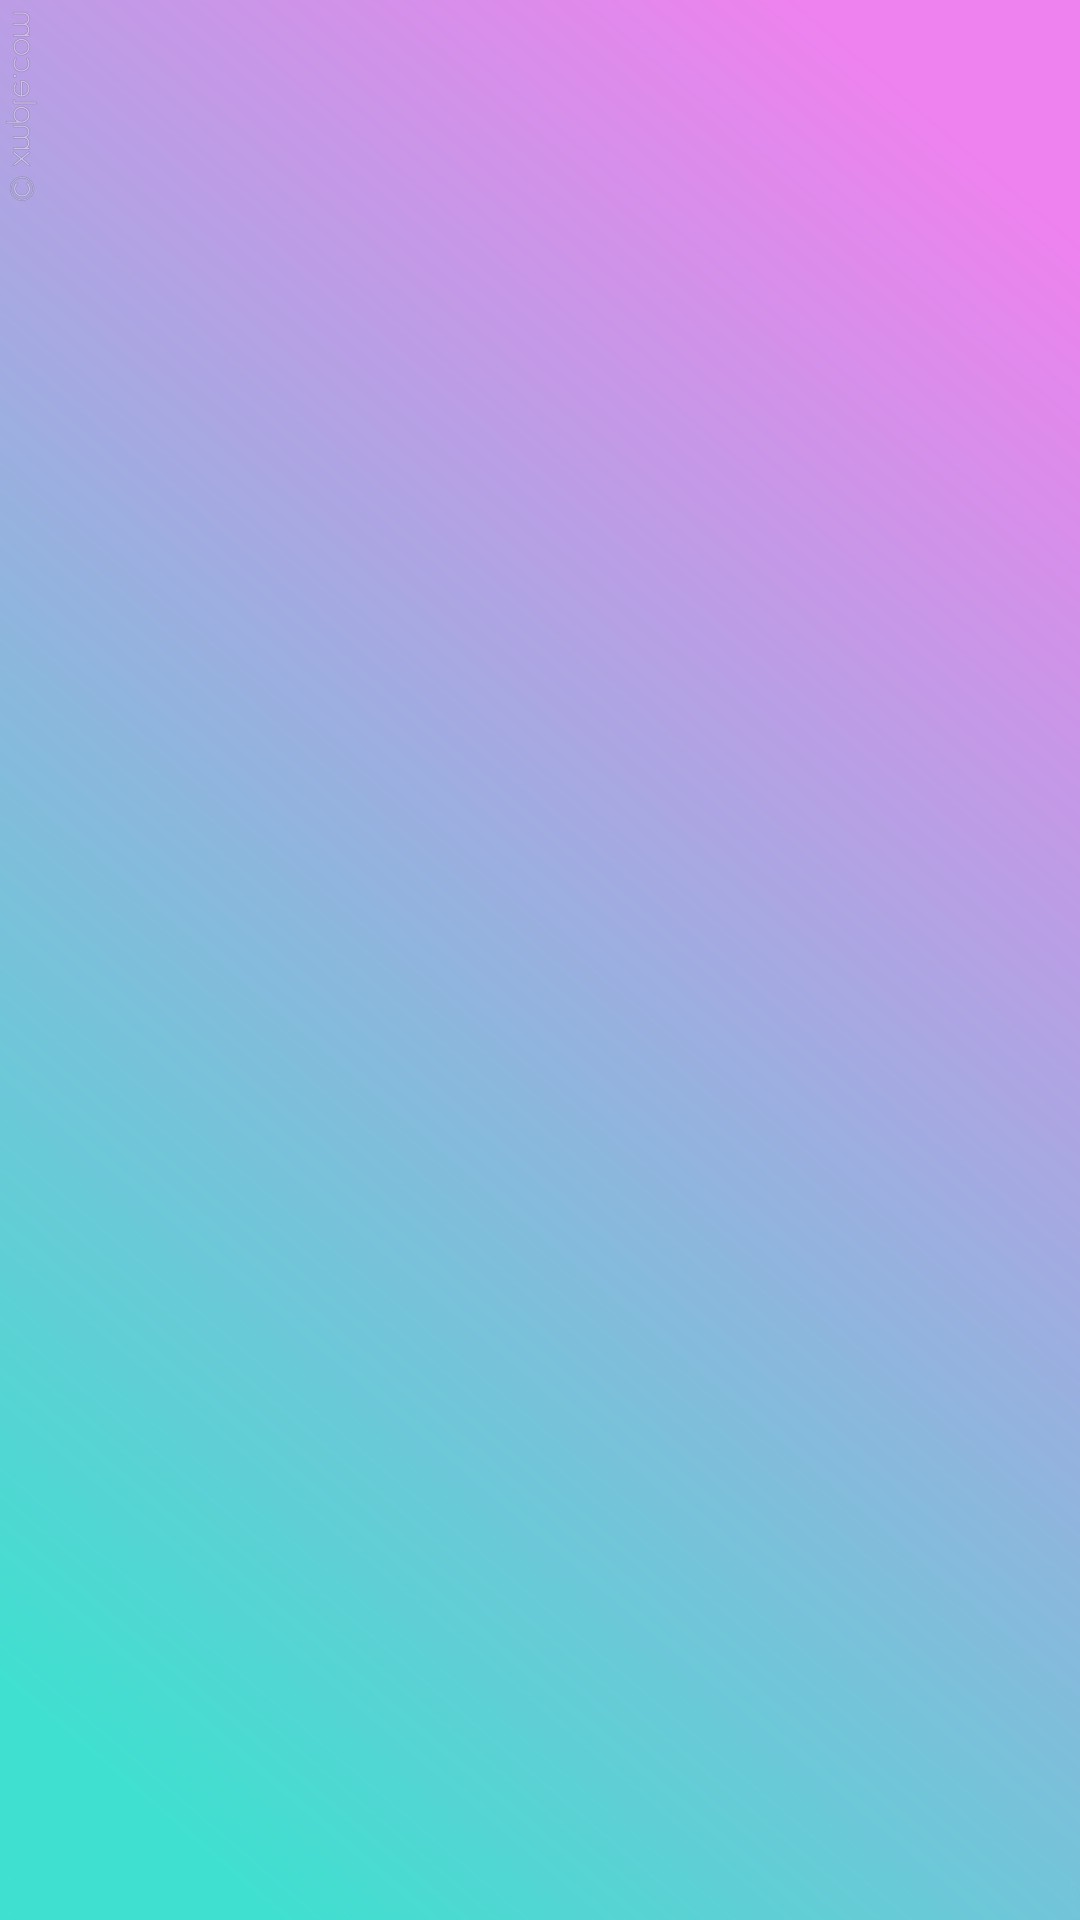 Gradient iPhone Screen Lock Wallpaper with high-resolution 1080x1920 pixel. You can set as wallpaper for Apple iPhone X, XS Max, XR, 8, 7, 6, SE, iPad. Enjoy and share your favorite HD wallpapers and background images